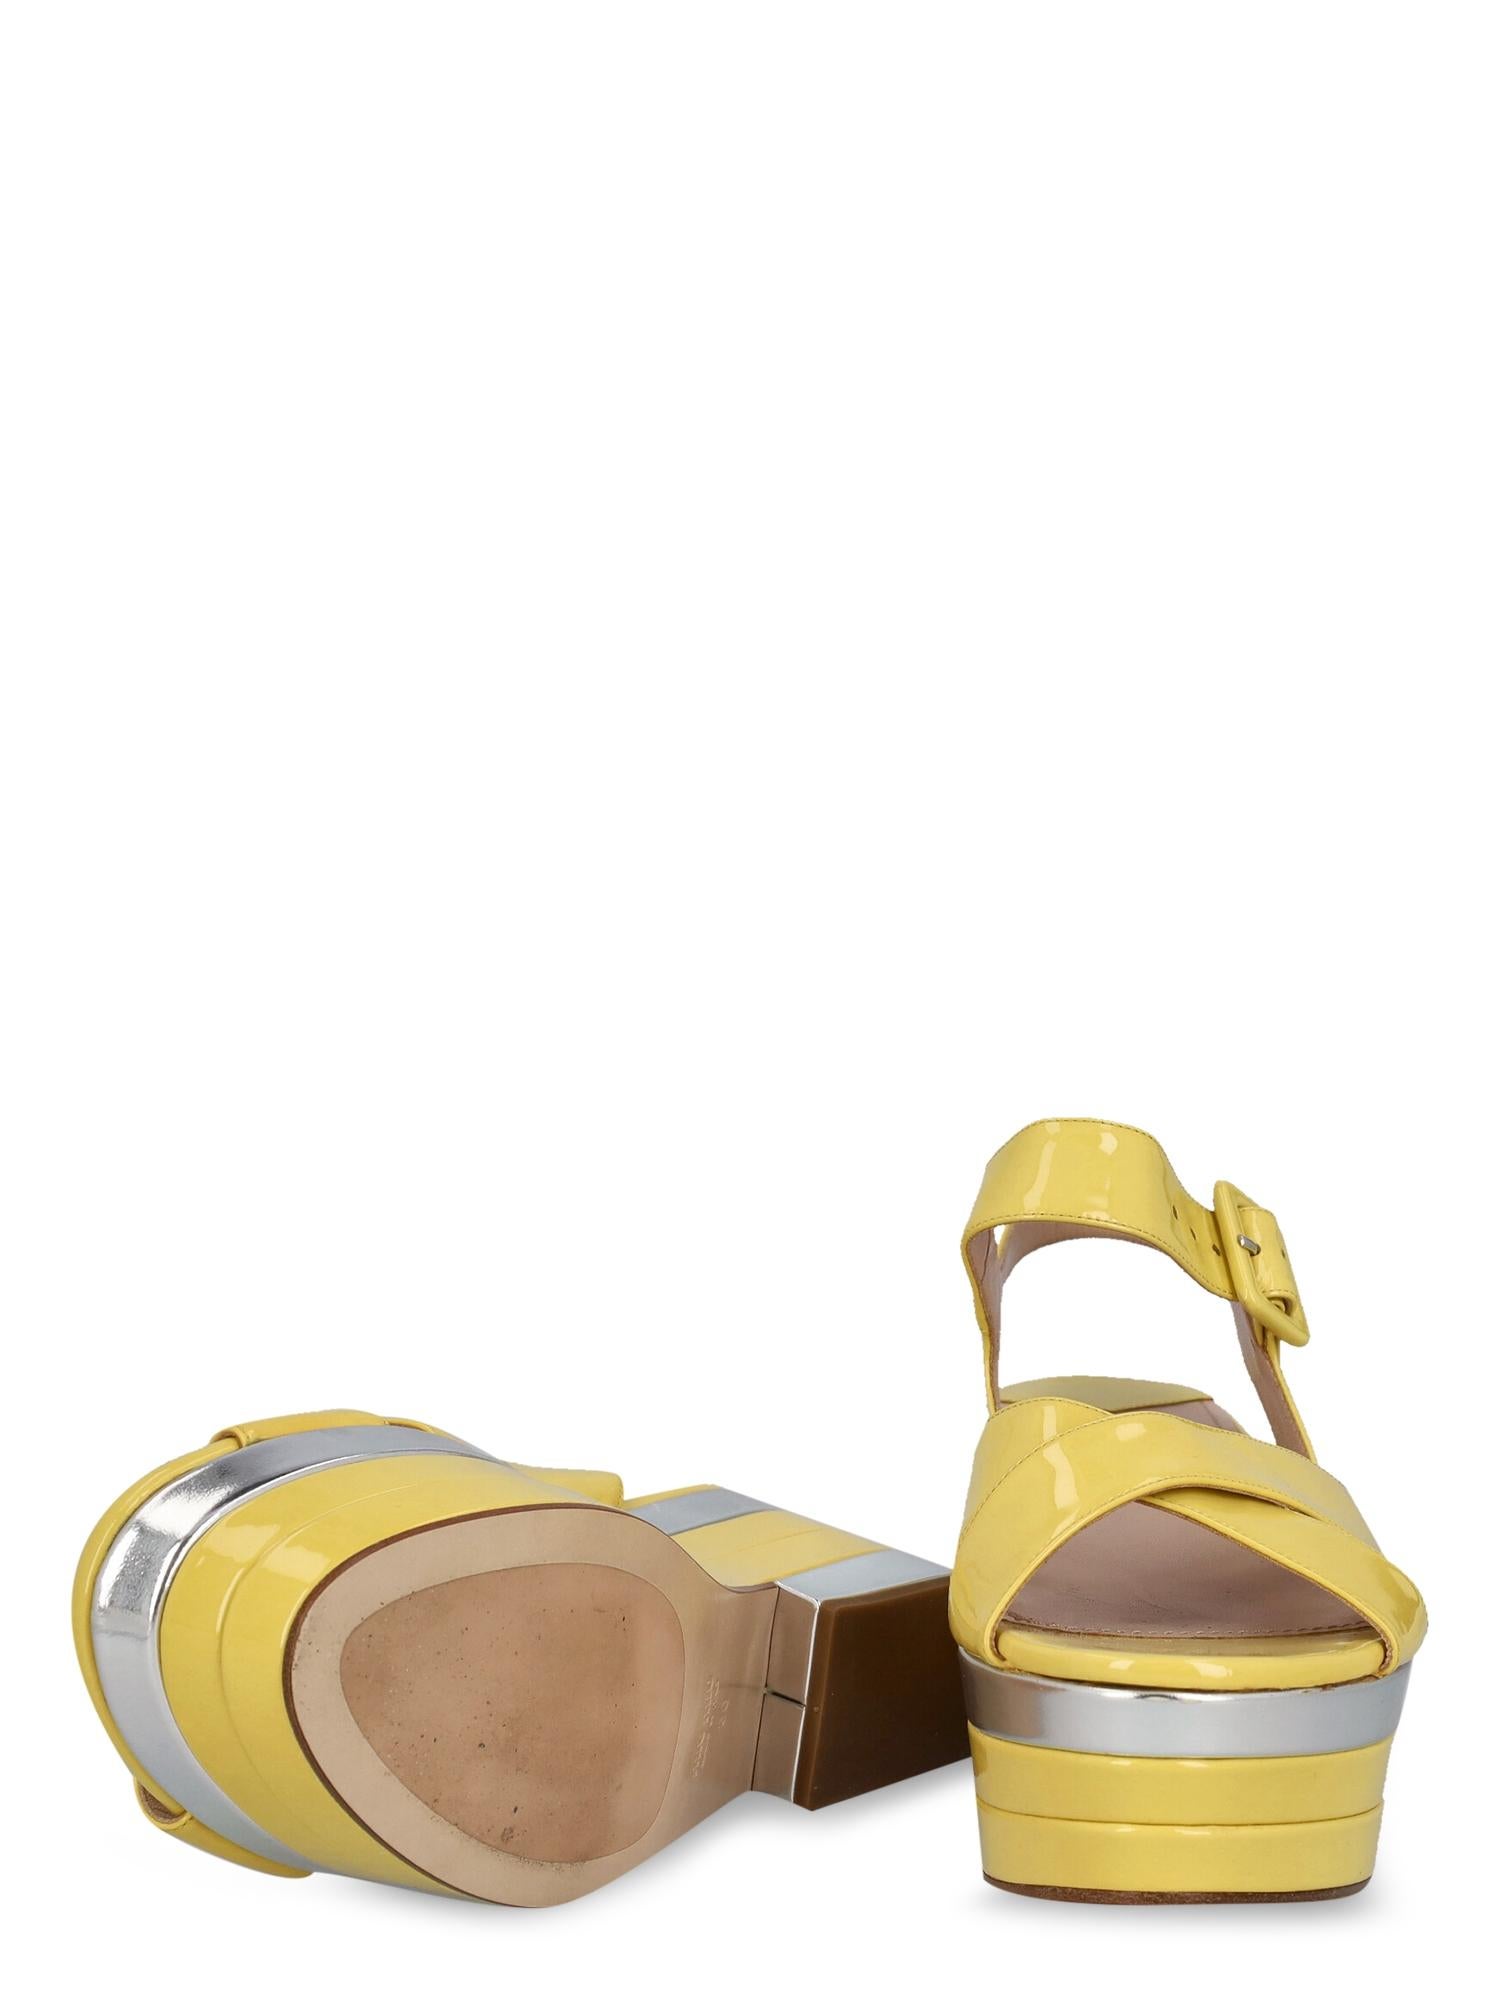 Miu Miu Women Sandals Silver, Yellow Leather EU 36 In Good Condition For Sale In Milan, IT